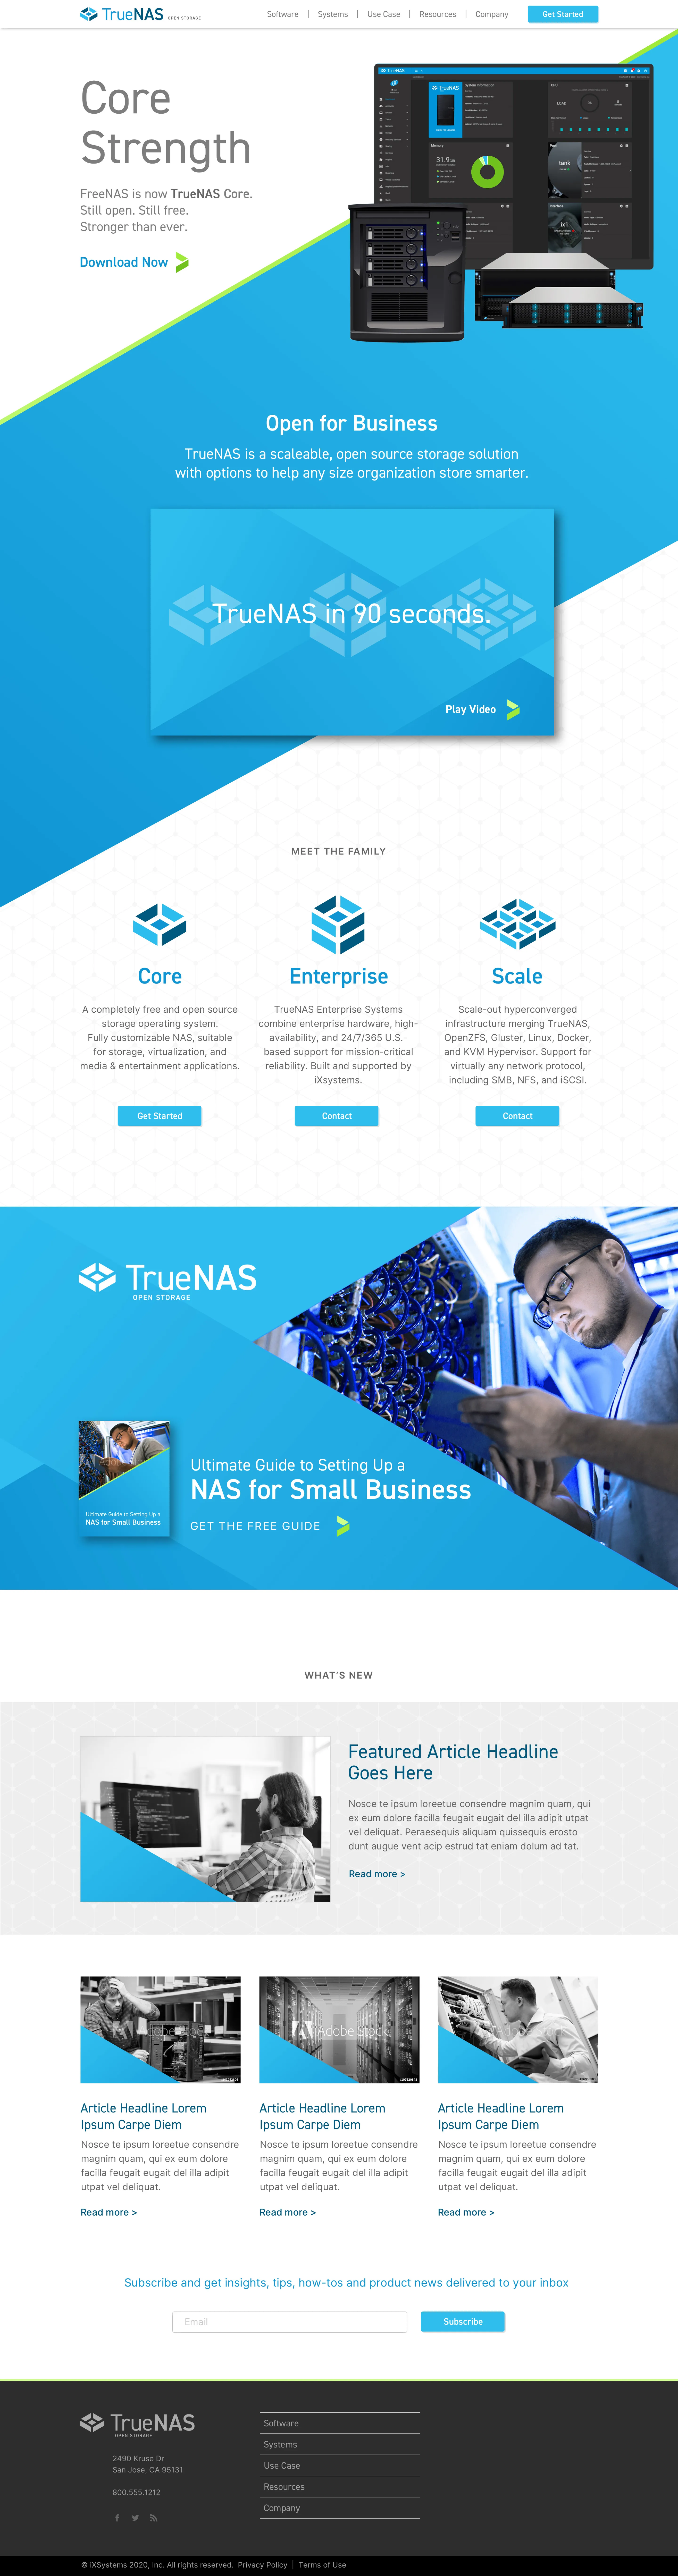 Image of TrueNAS home page mockup with new brand system applied